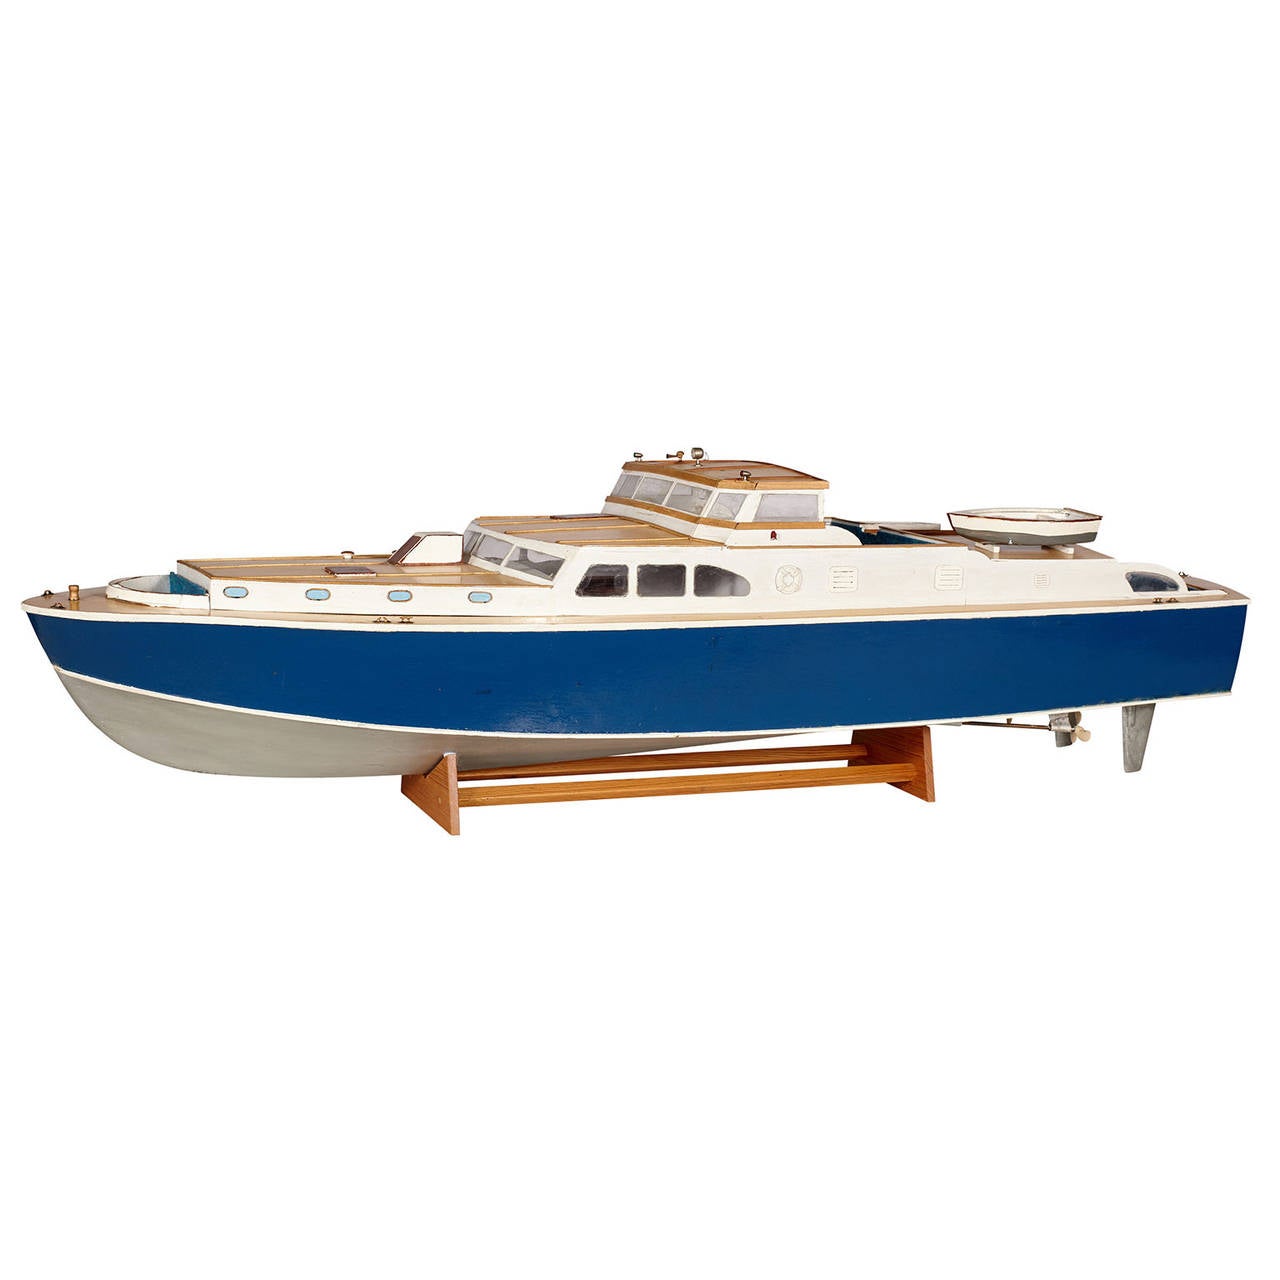 Cabin cruiser boat model with wooden stand.